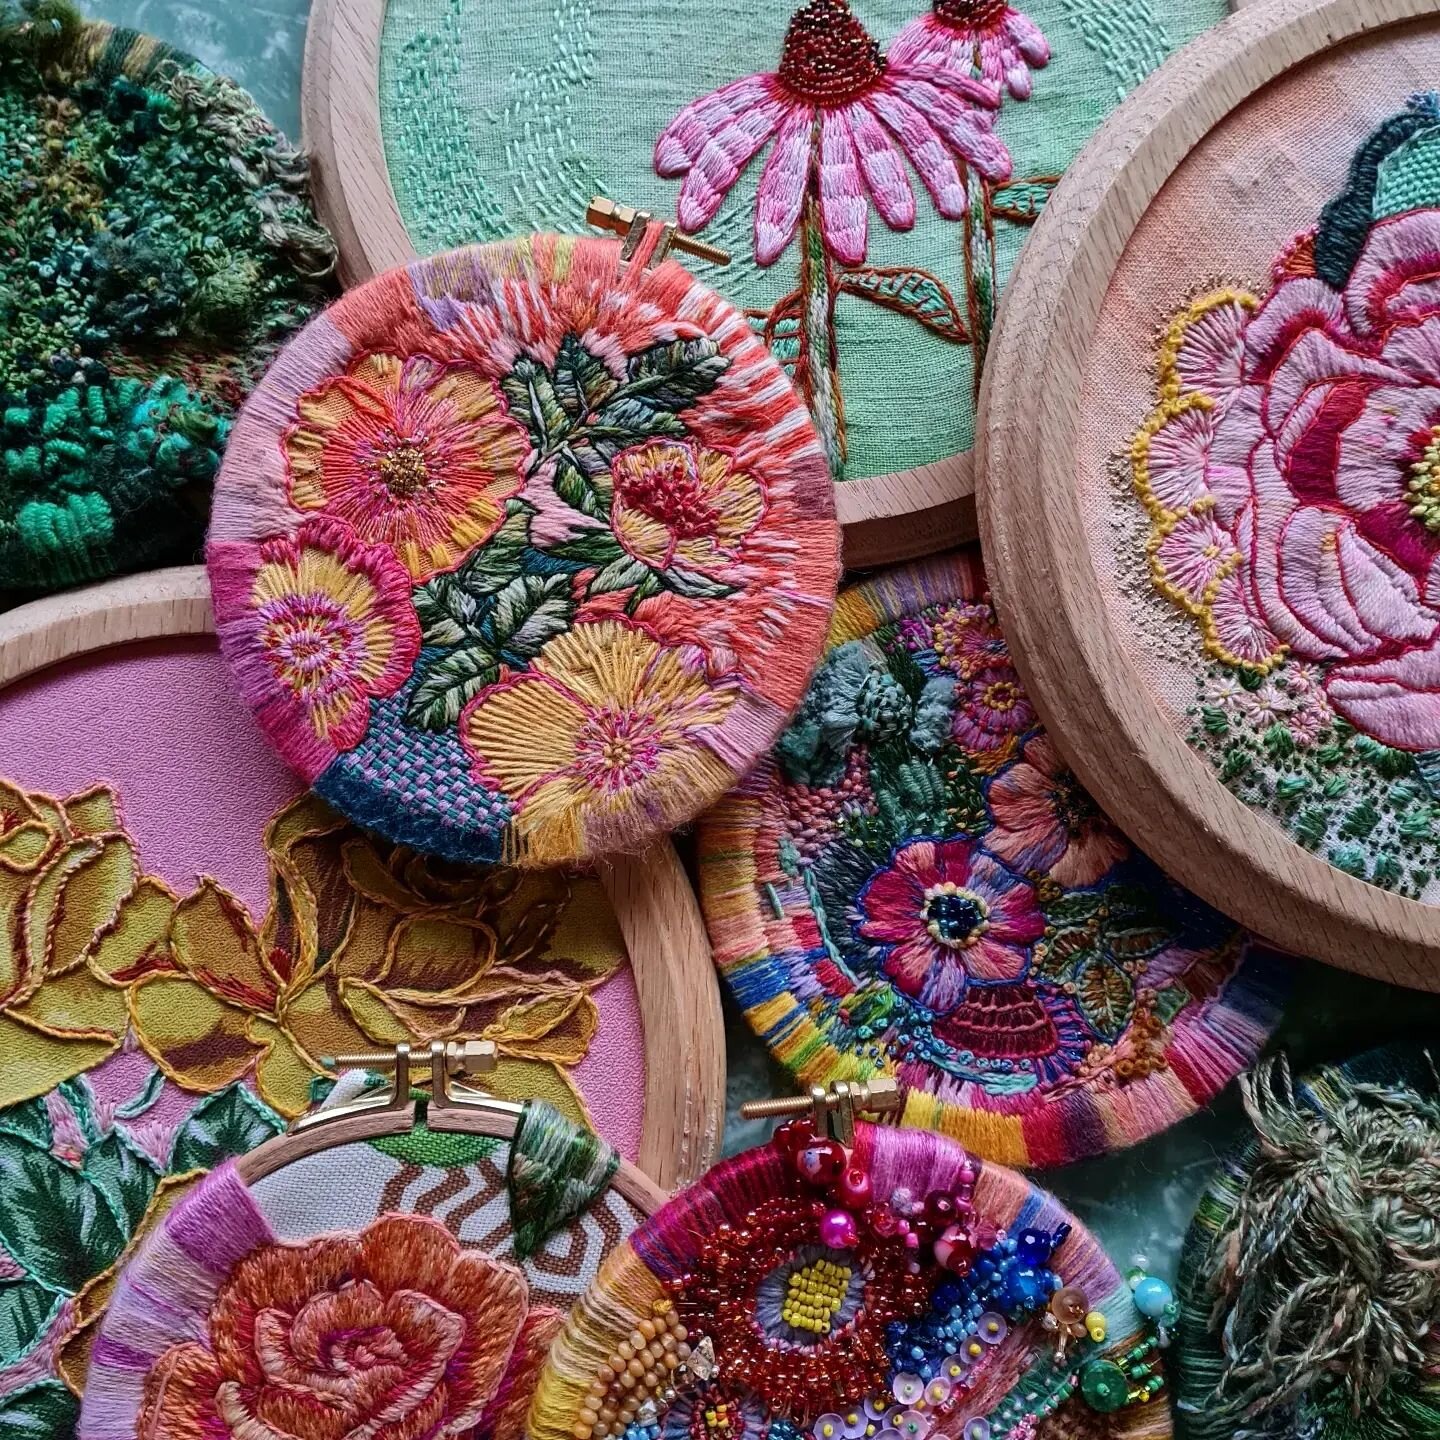 Learn to stitch florals with me @green.door.studios ... nab one of the lucky last spots on my otherwise sold out Australia workshop series for '23. Join me on Monday 1st May in Robertson NSW at the delightful @green.door.studios for a blissful day fo